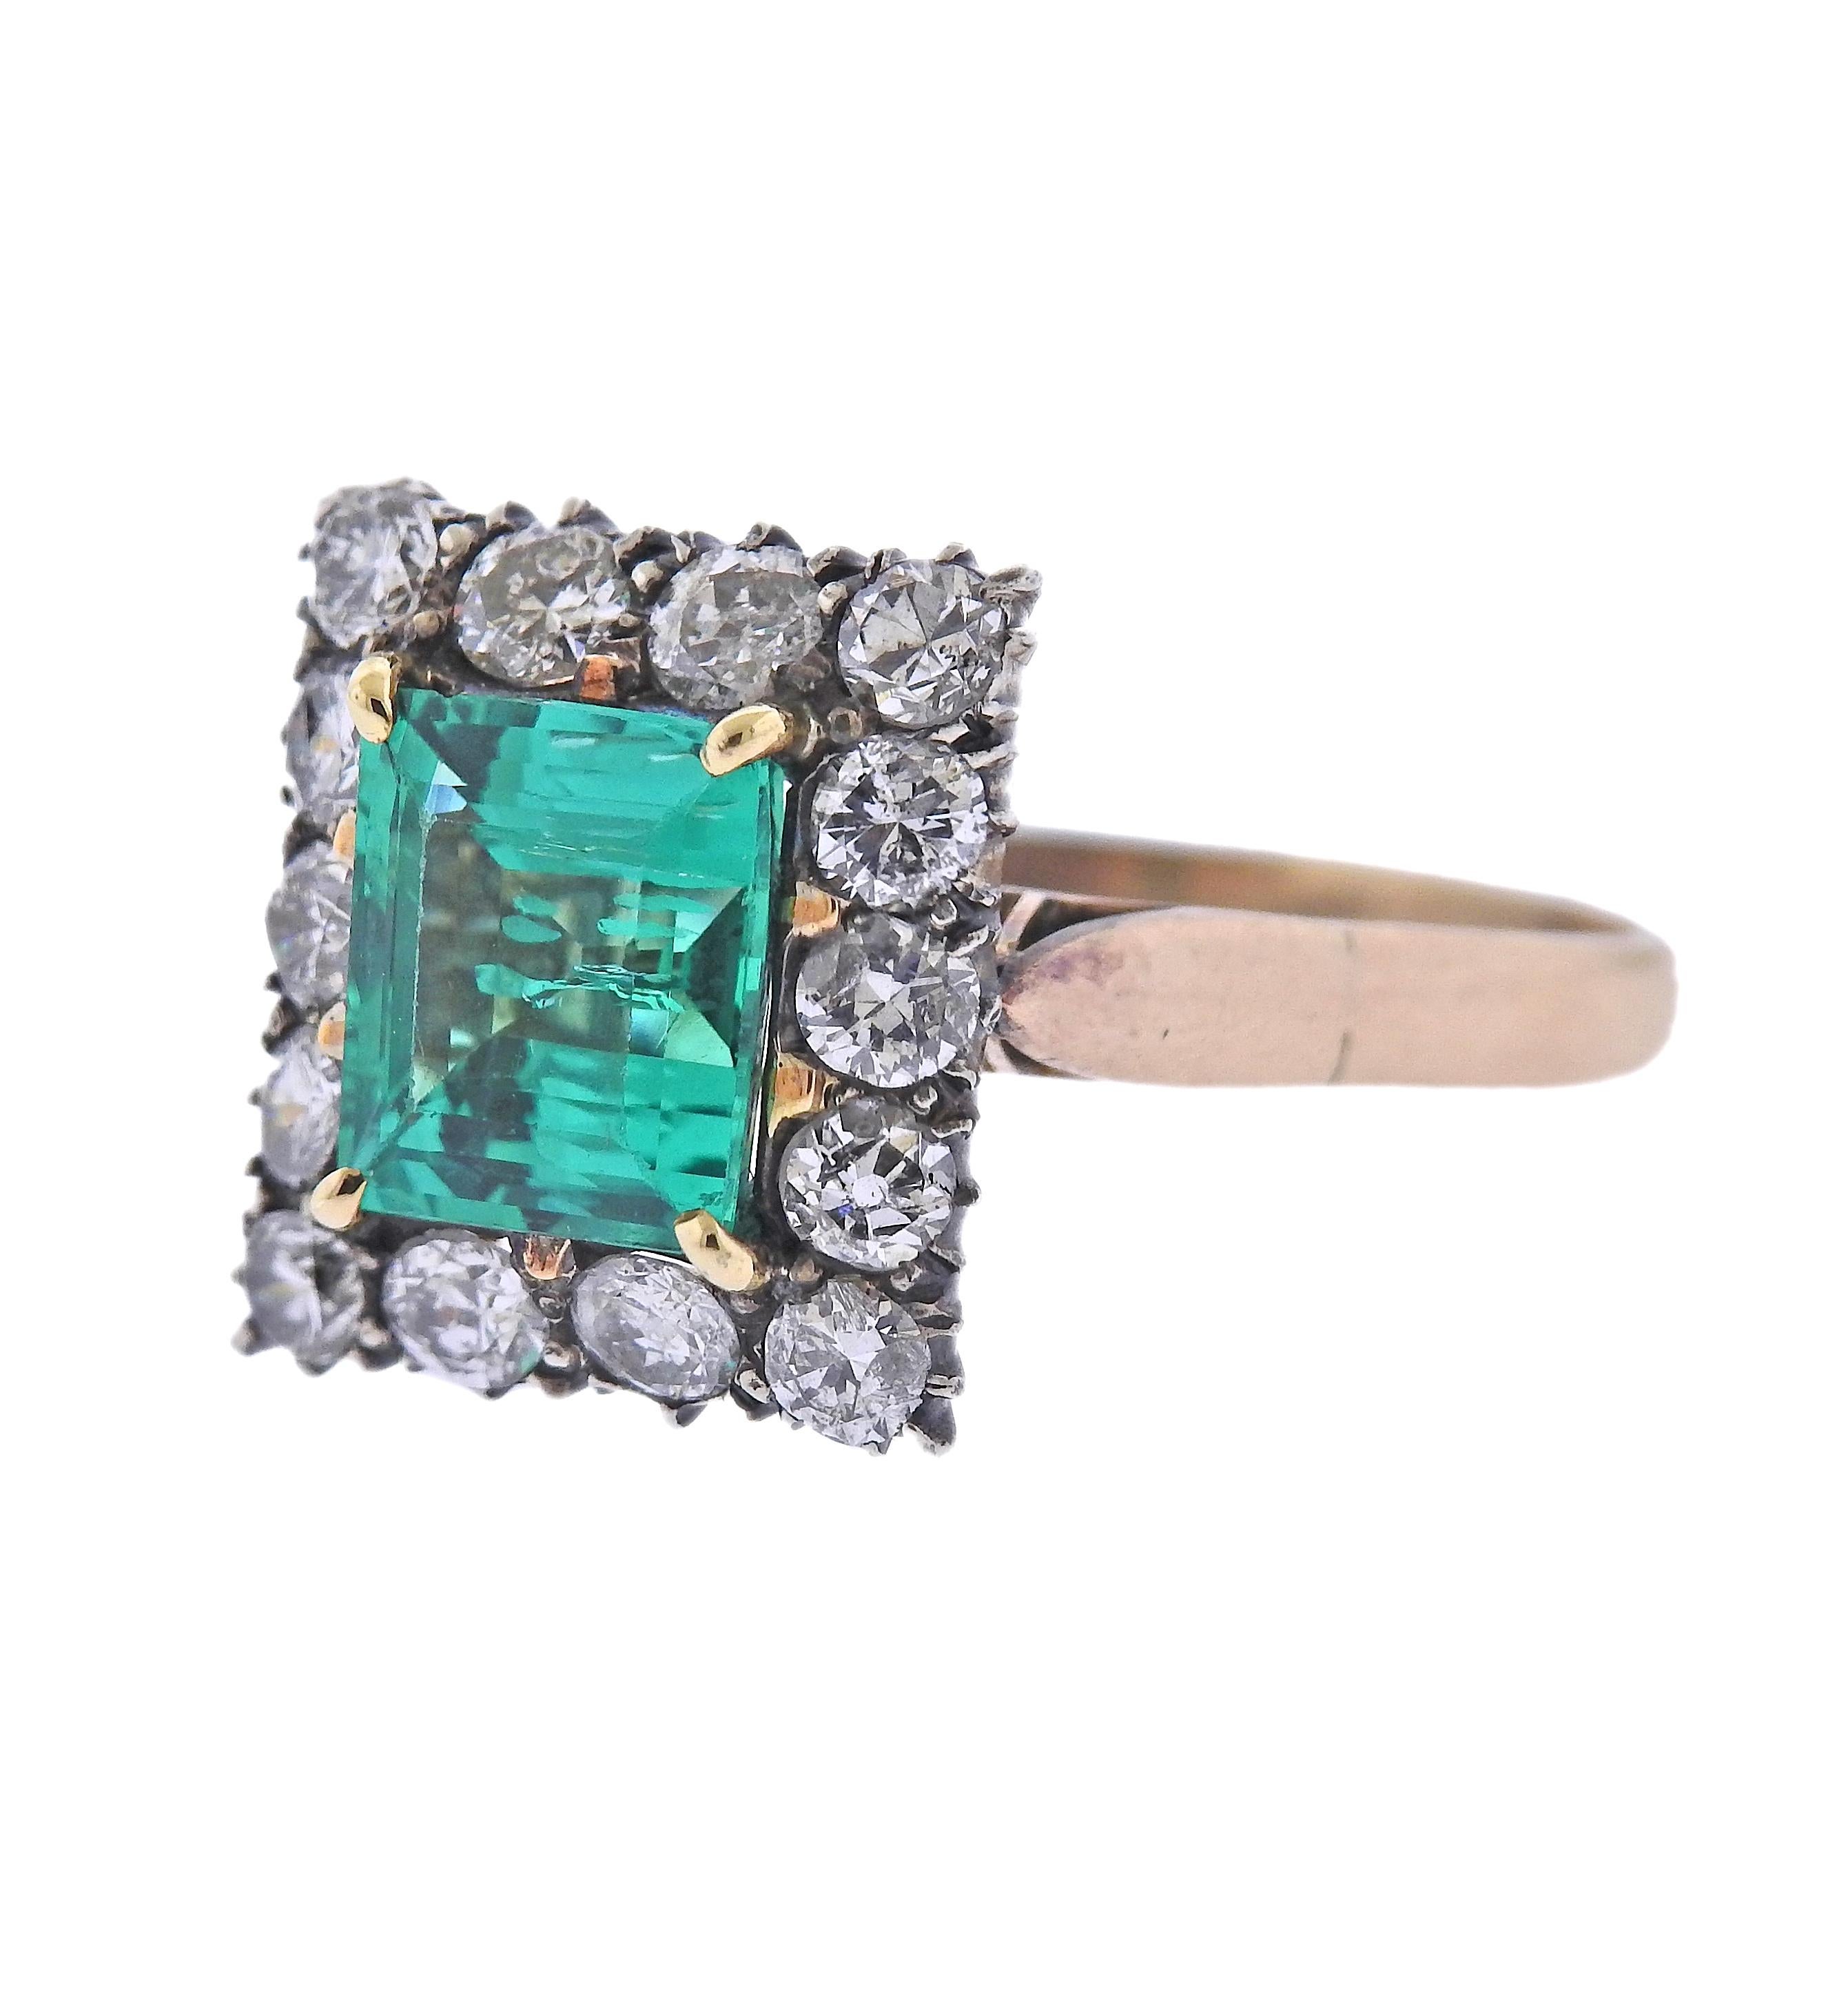 14k gold ring with center approx. 2.18ct emerald (stone measures 8.7 x 7.55 x4.8mm, has internal fracture), surrounded with approx. 1.40ctw in H-I/Si diamonds. Ring size 8.5 (EU 58.5) and top is 15 x 14mm, weight 5.6 grams. 